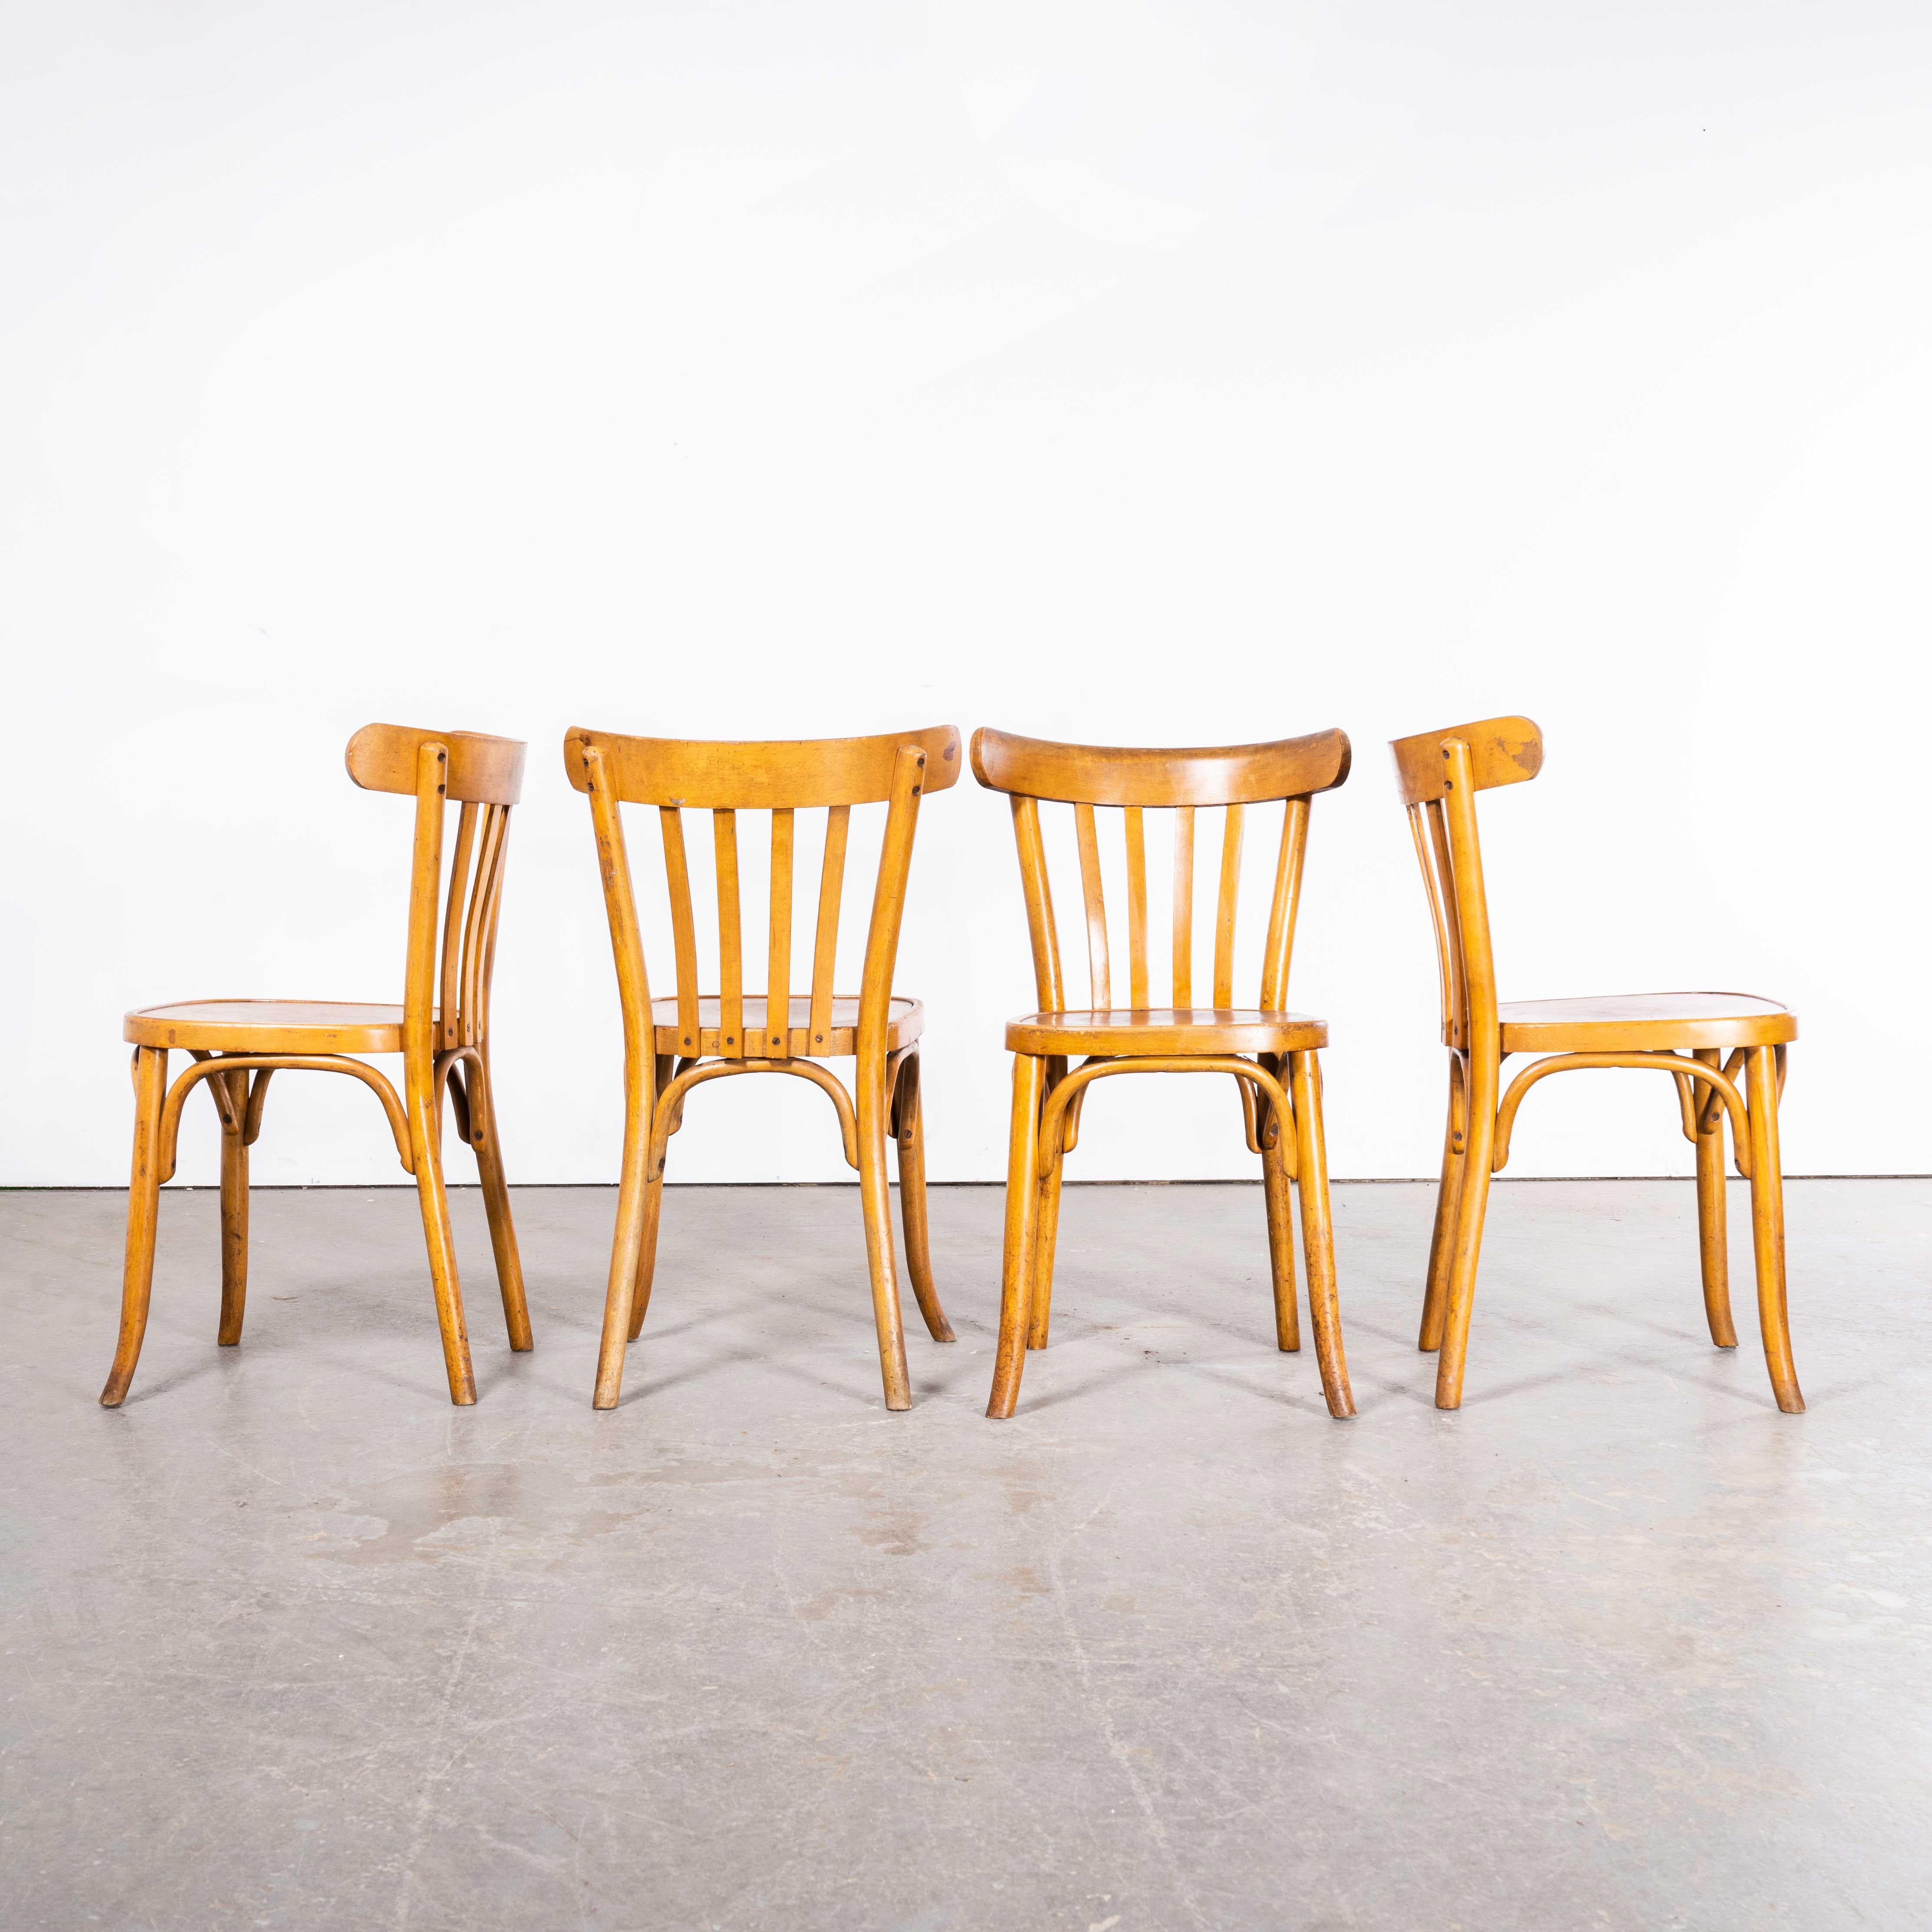 1950’s Luterma Honey Oak Bentwood Dining Chair – Set Of Four
1950’s Luterma Honey Oak Bentwood Dining Chair – Set Of Four. The process of steam bending beech to create elegant chairs was discovered and developed by Thonet, but when its patents